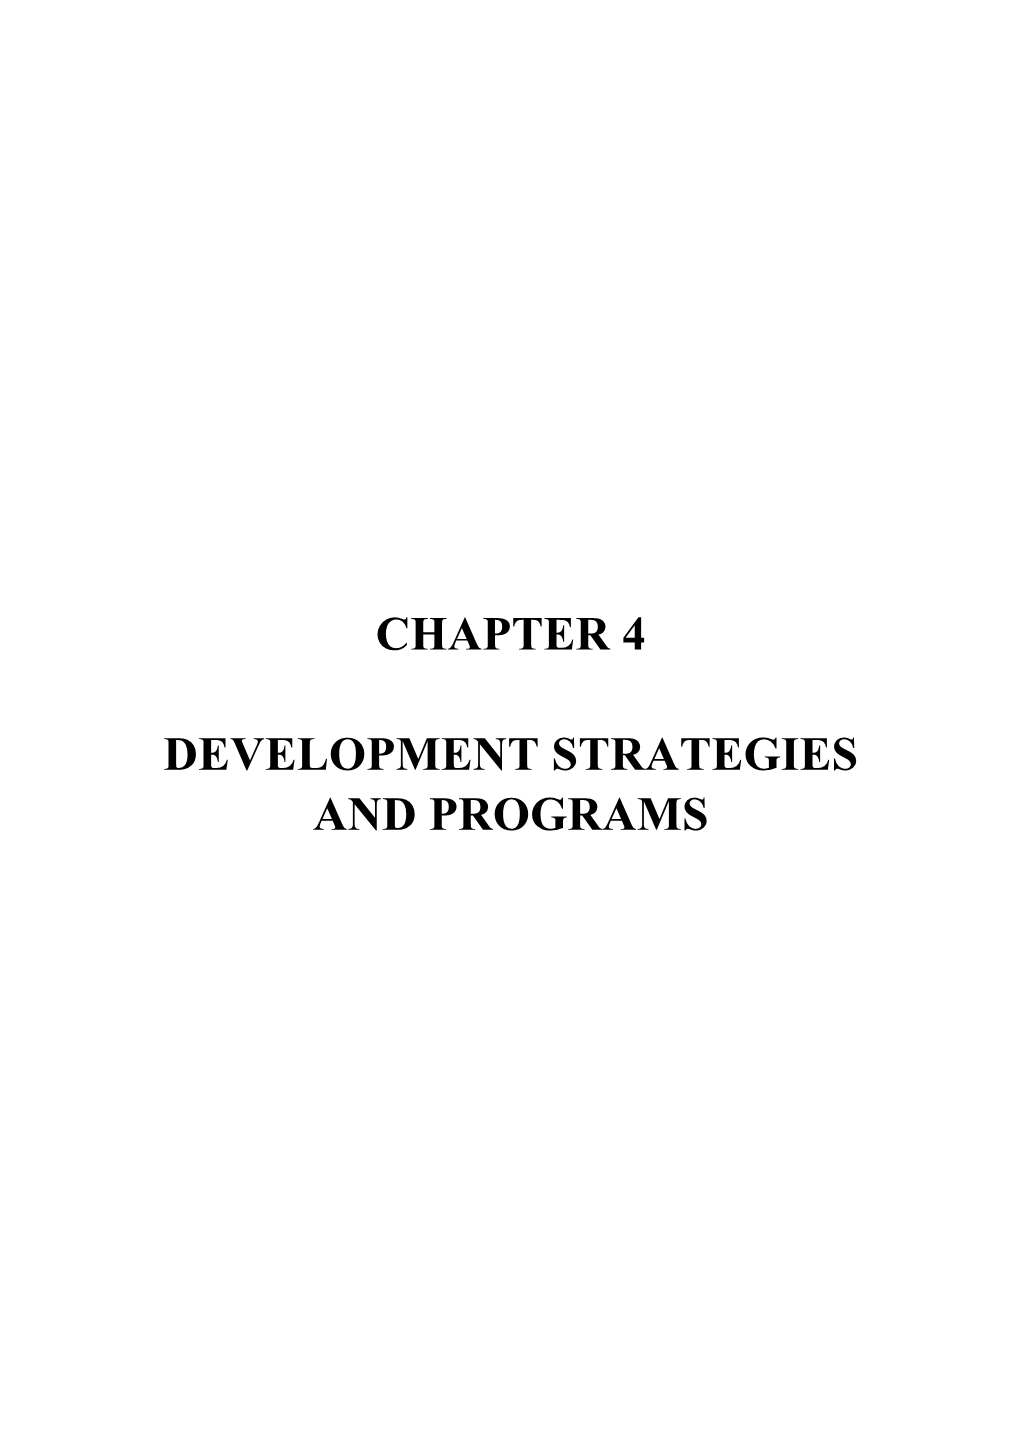 Chapter 4 Development Strategies and Programs